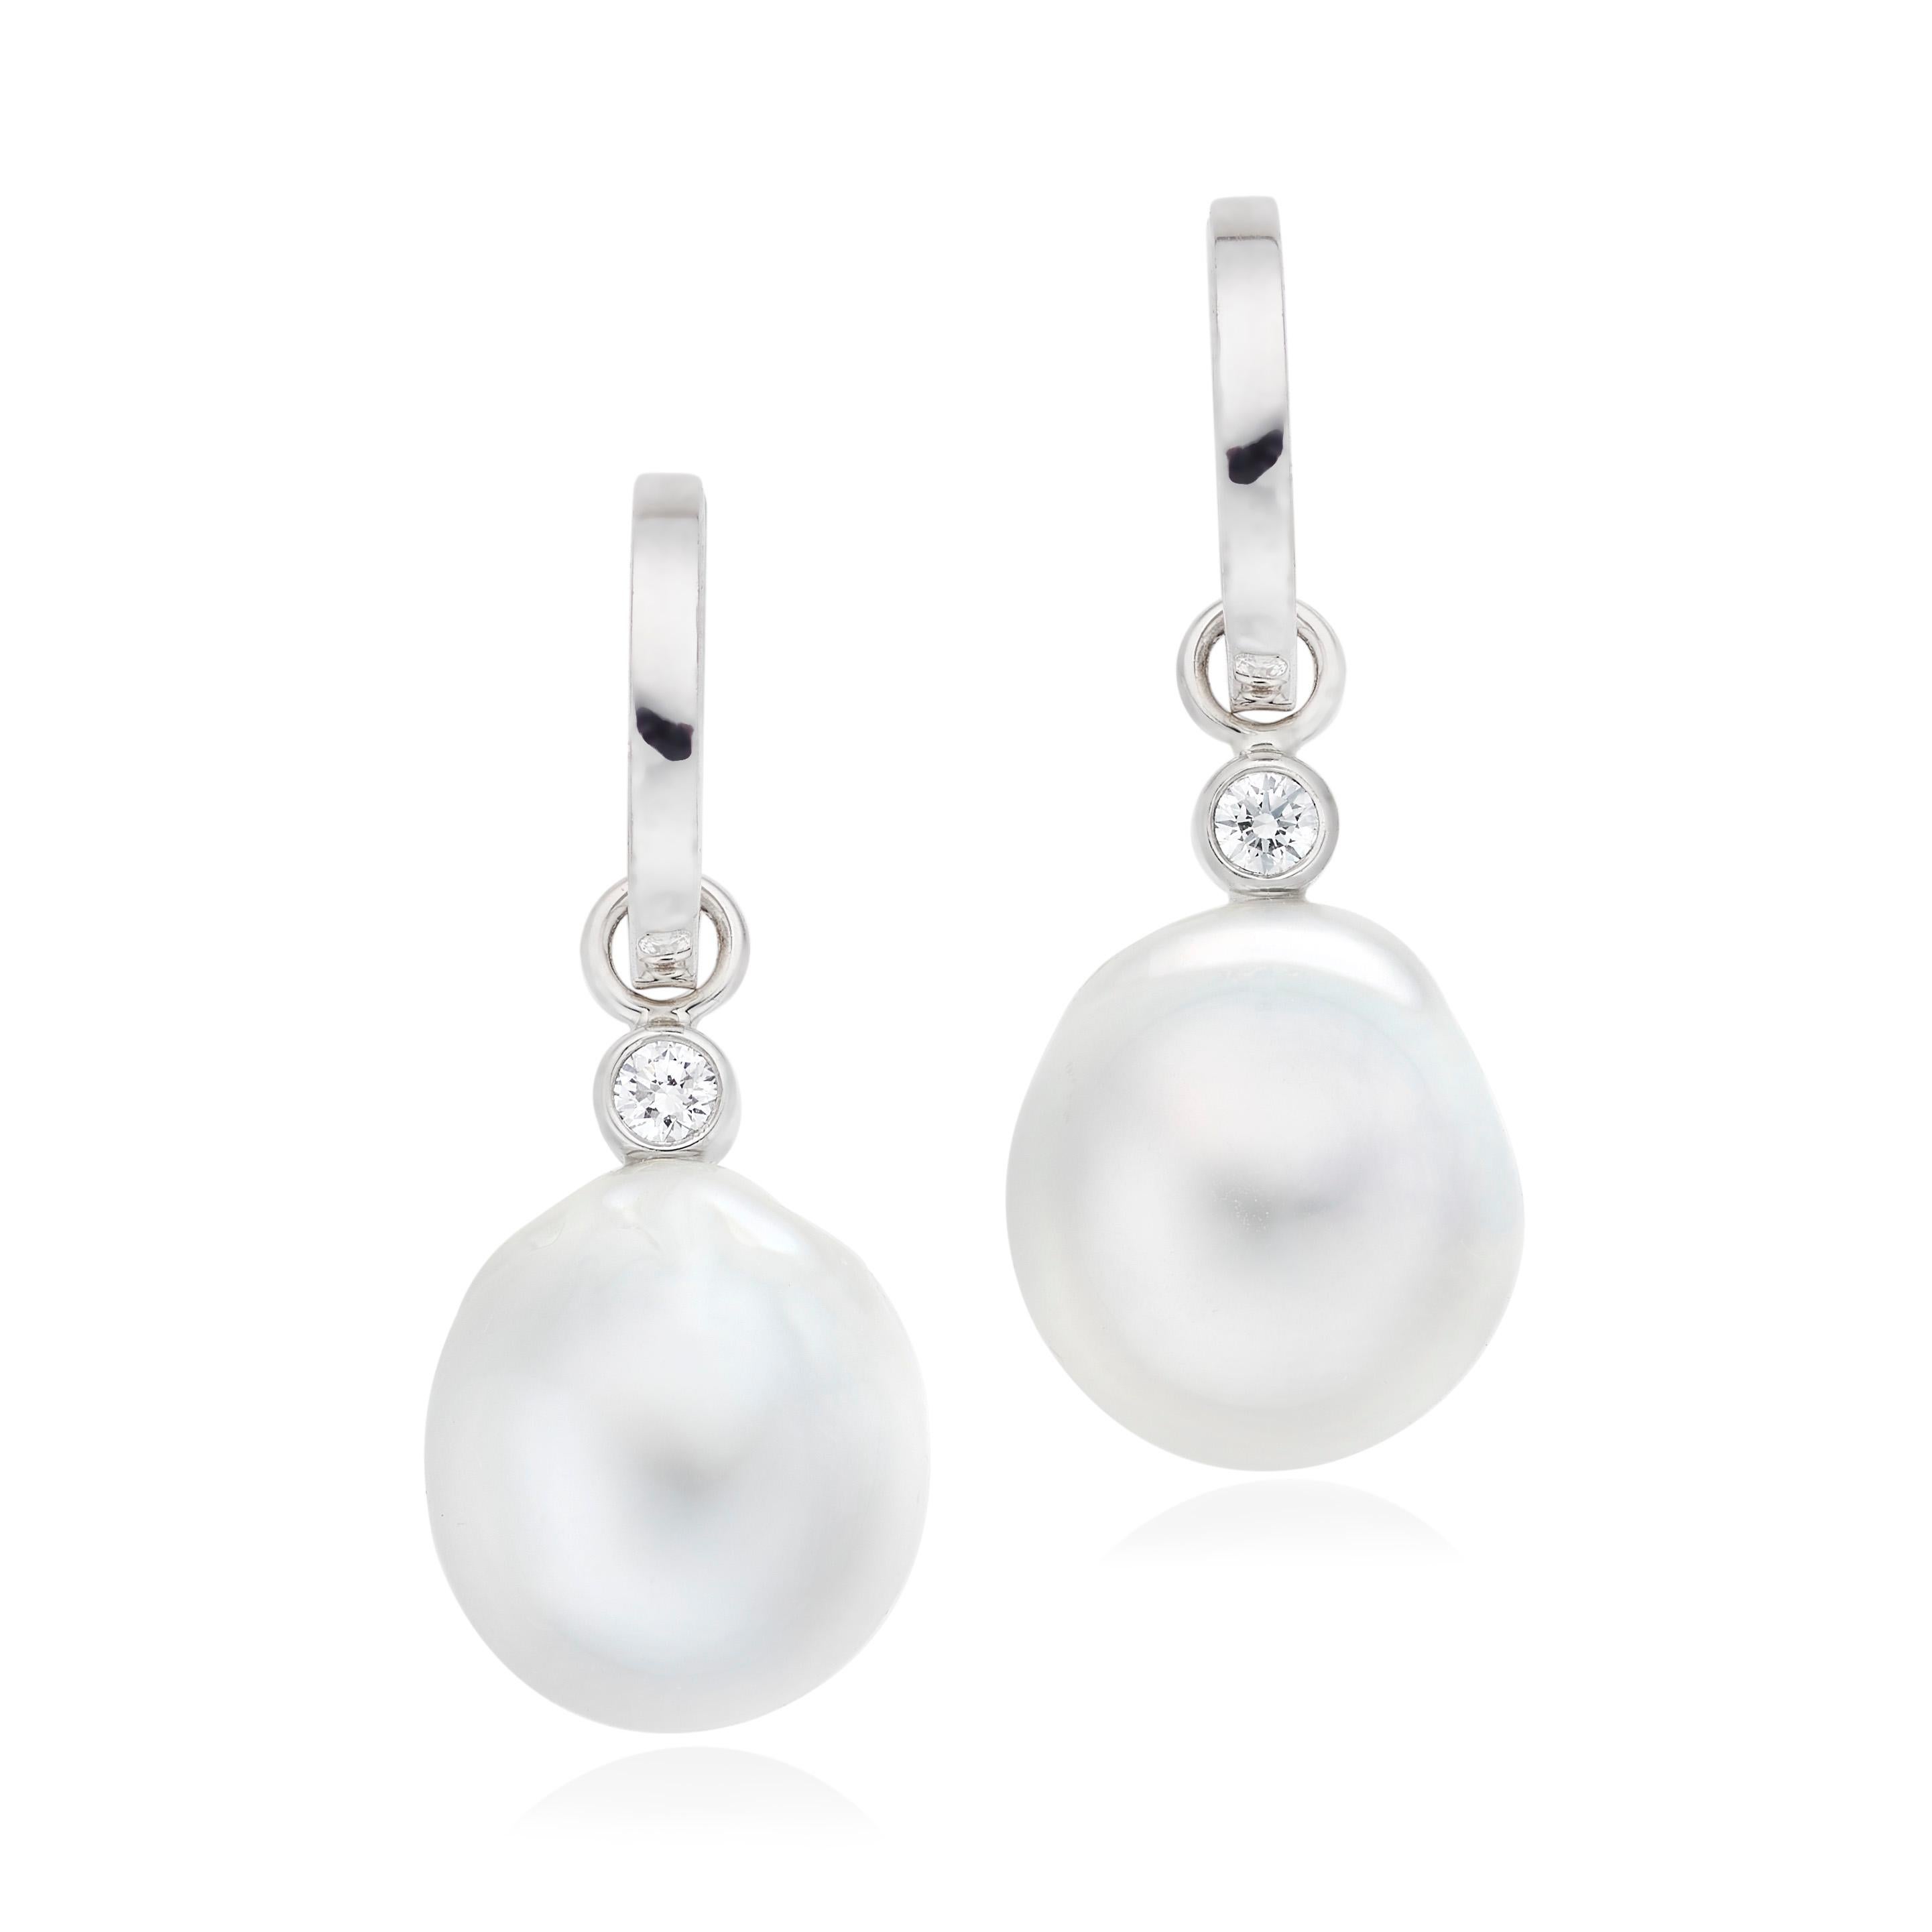 A pair of  South Sea Pearl earrings from Lilly Hastedt's
